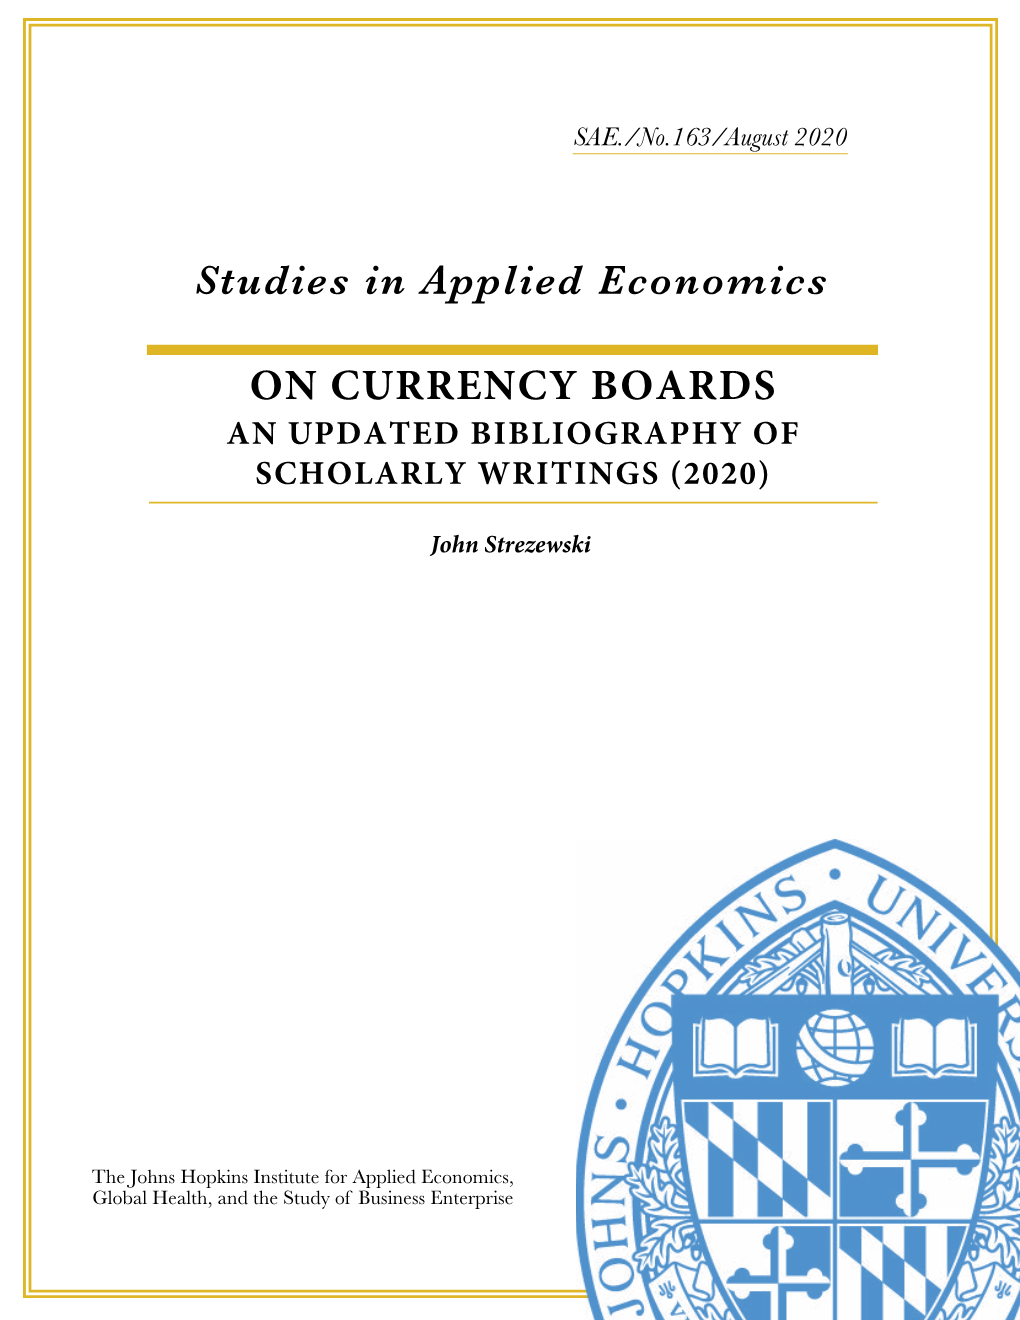 On Currency Boards an Updated Bibliography of Scholarly Writings (2020)